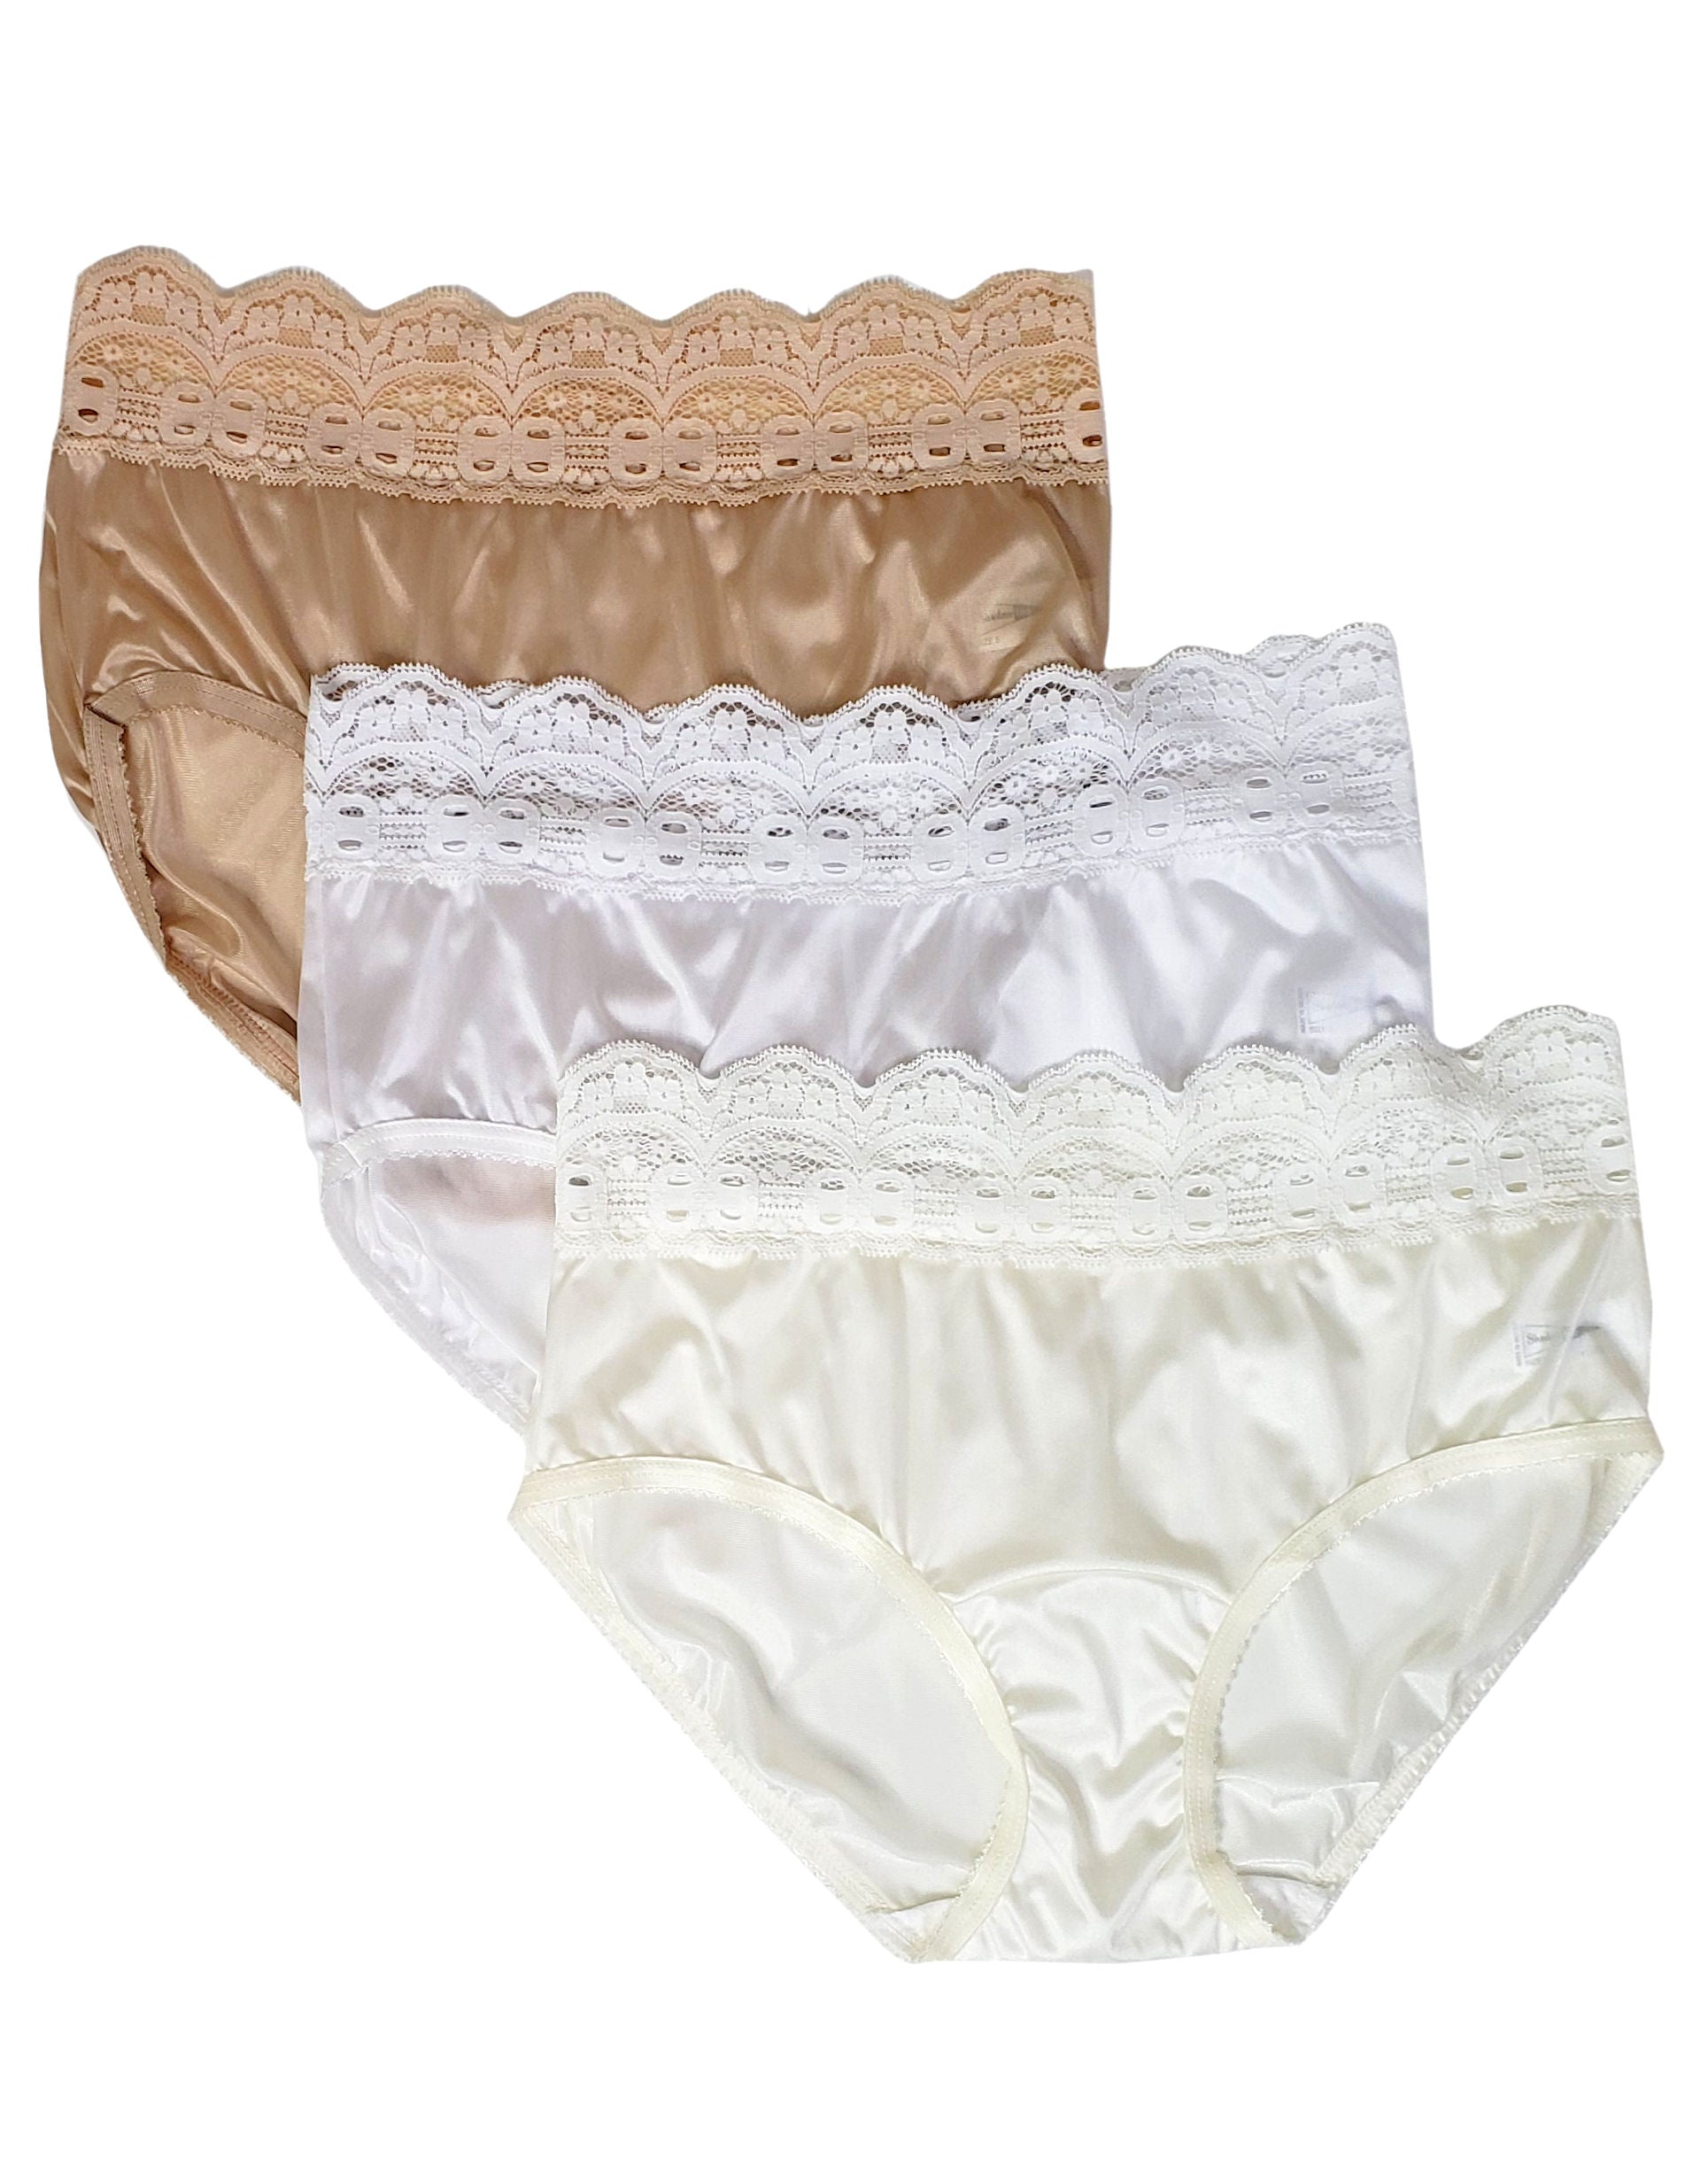 Shadowline Women's Nylon Full Brief Panty 3-Pack Assorted 17032